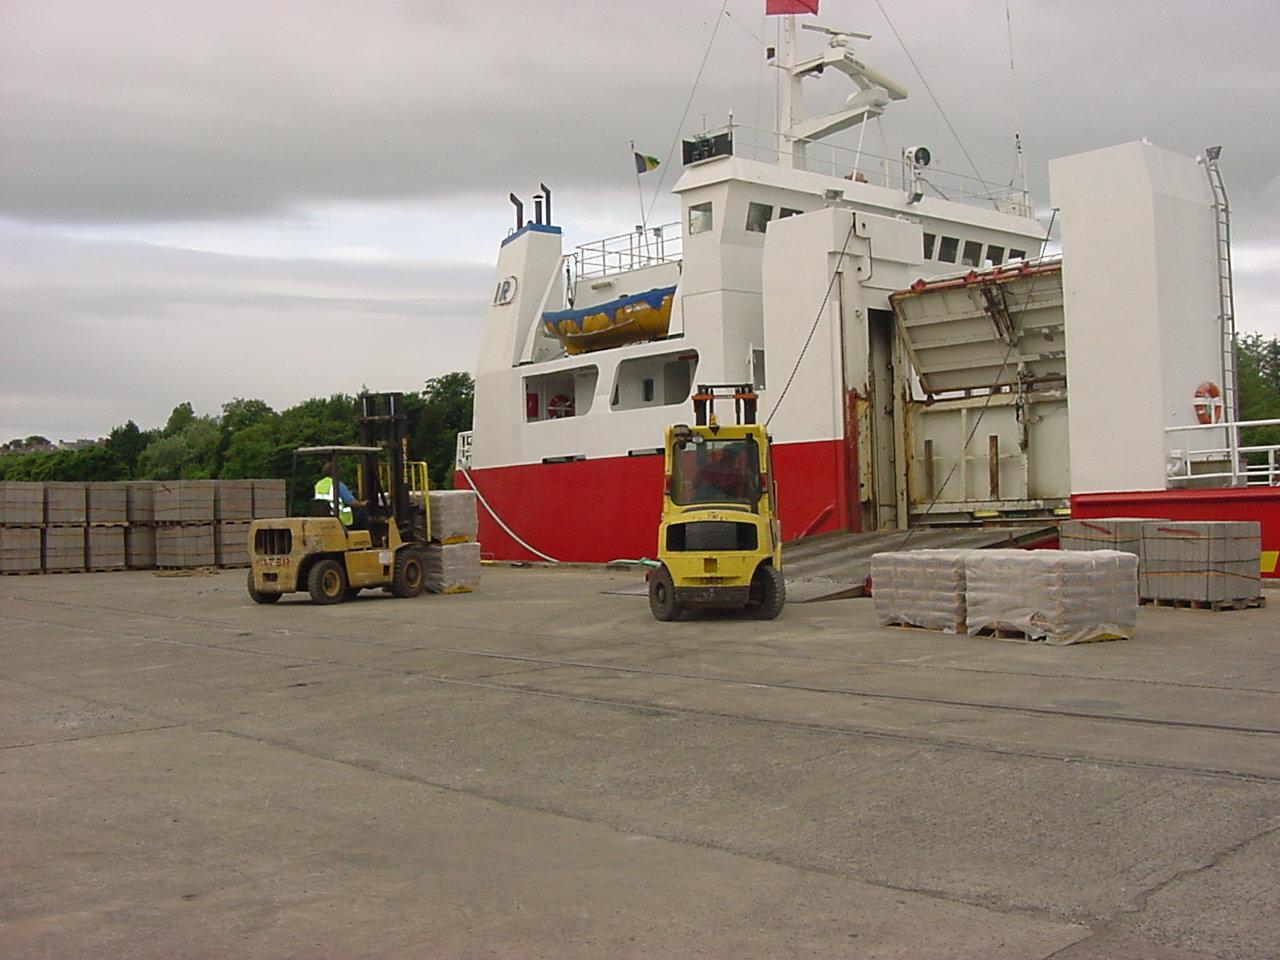 Northern Ireland Commercial Shipping